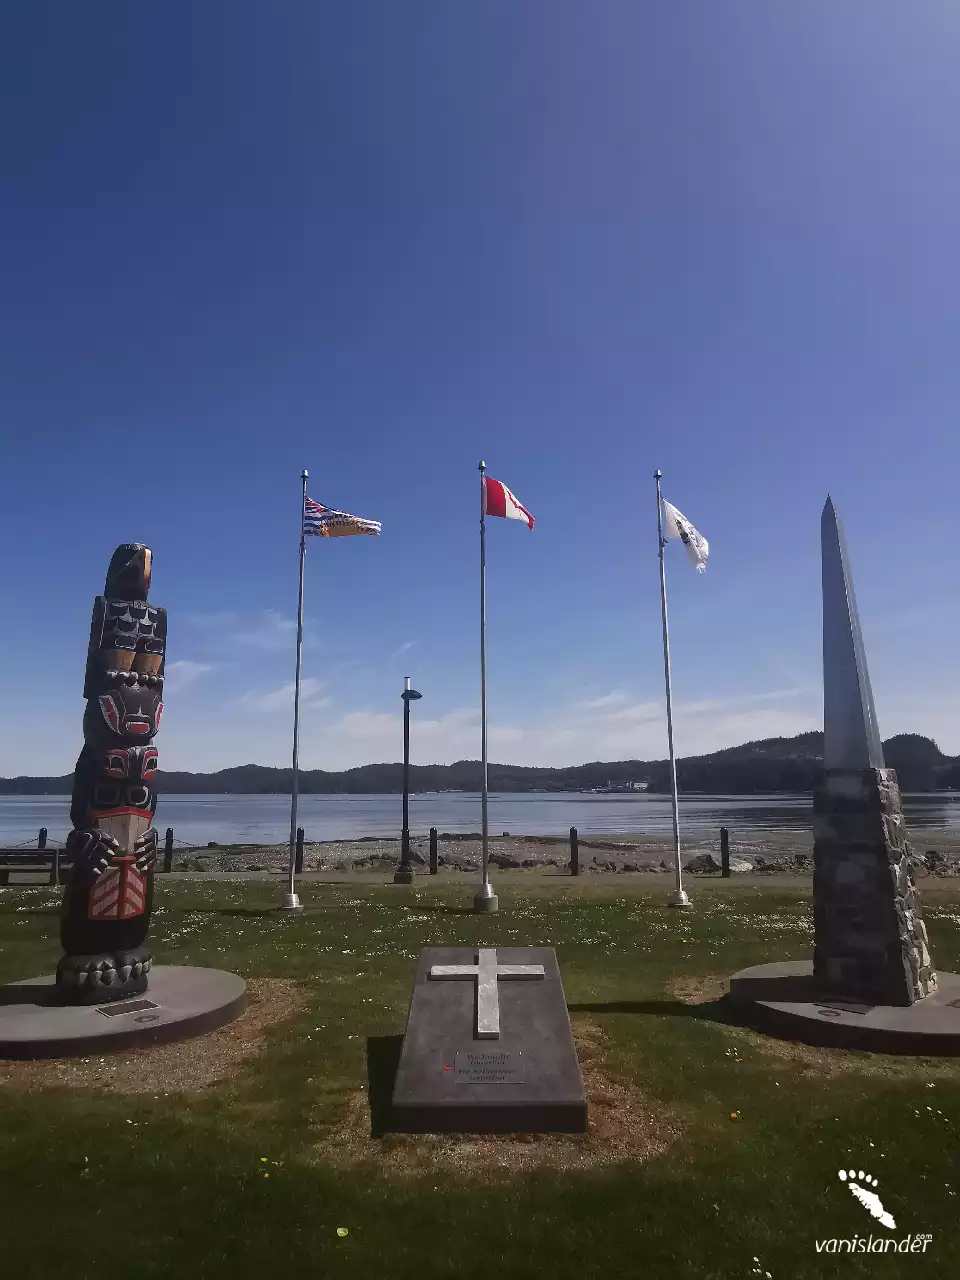 Totem, cenotaph and B.C. flag view in Port Hardy, Vancouver Island